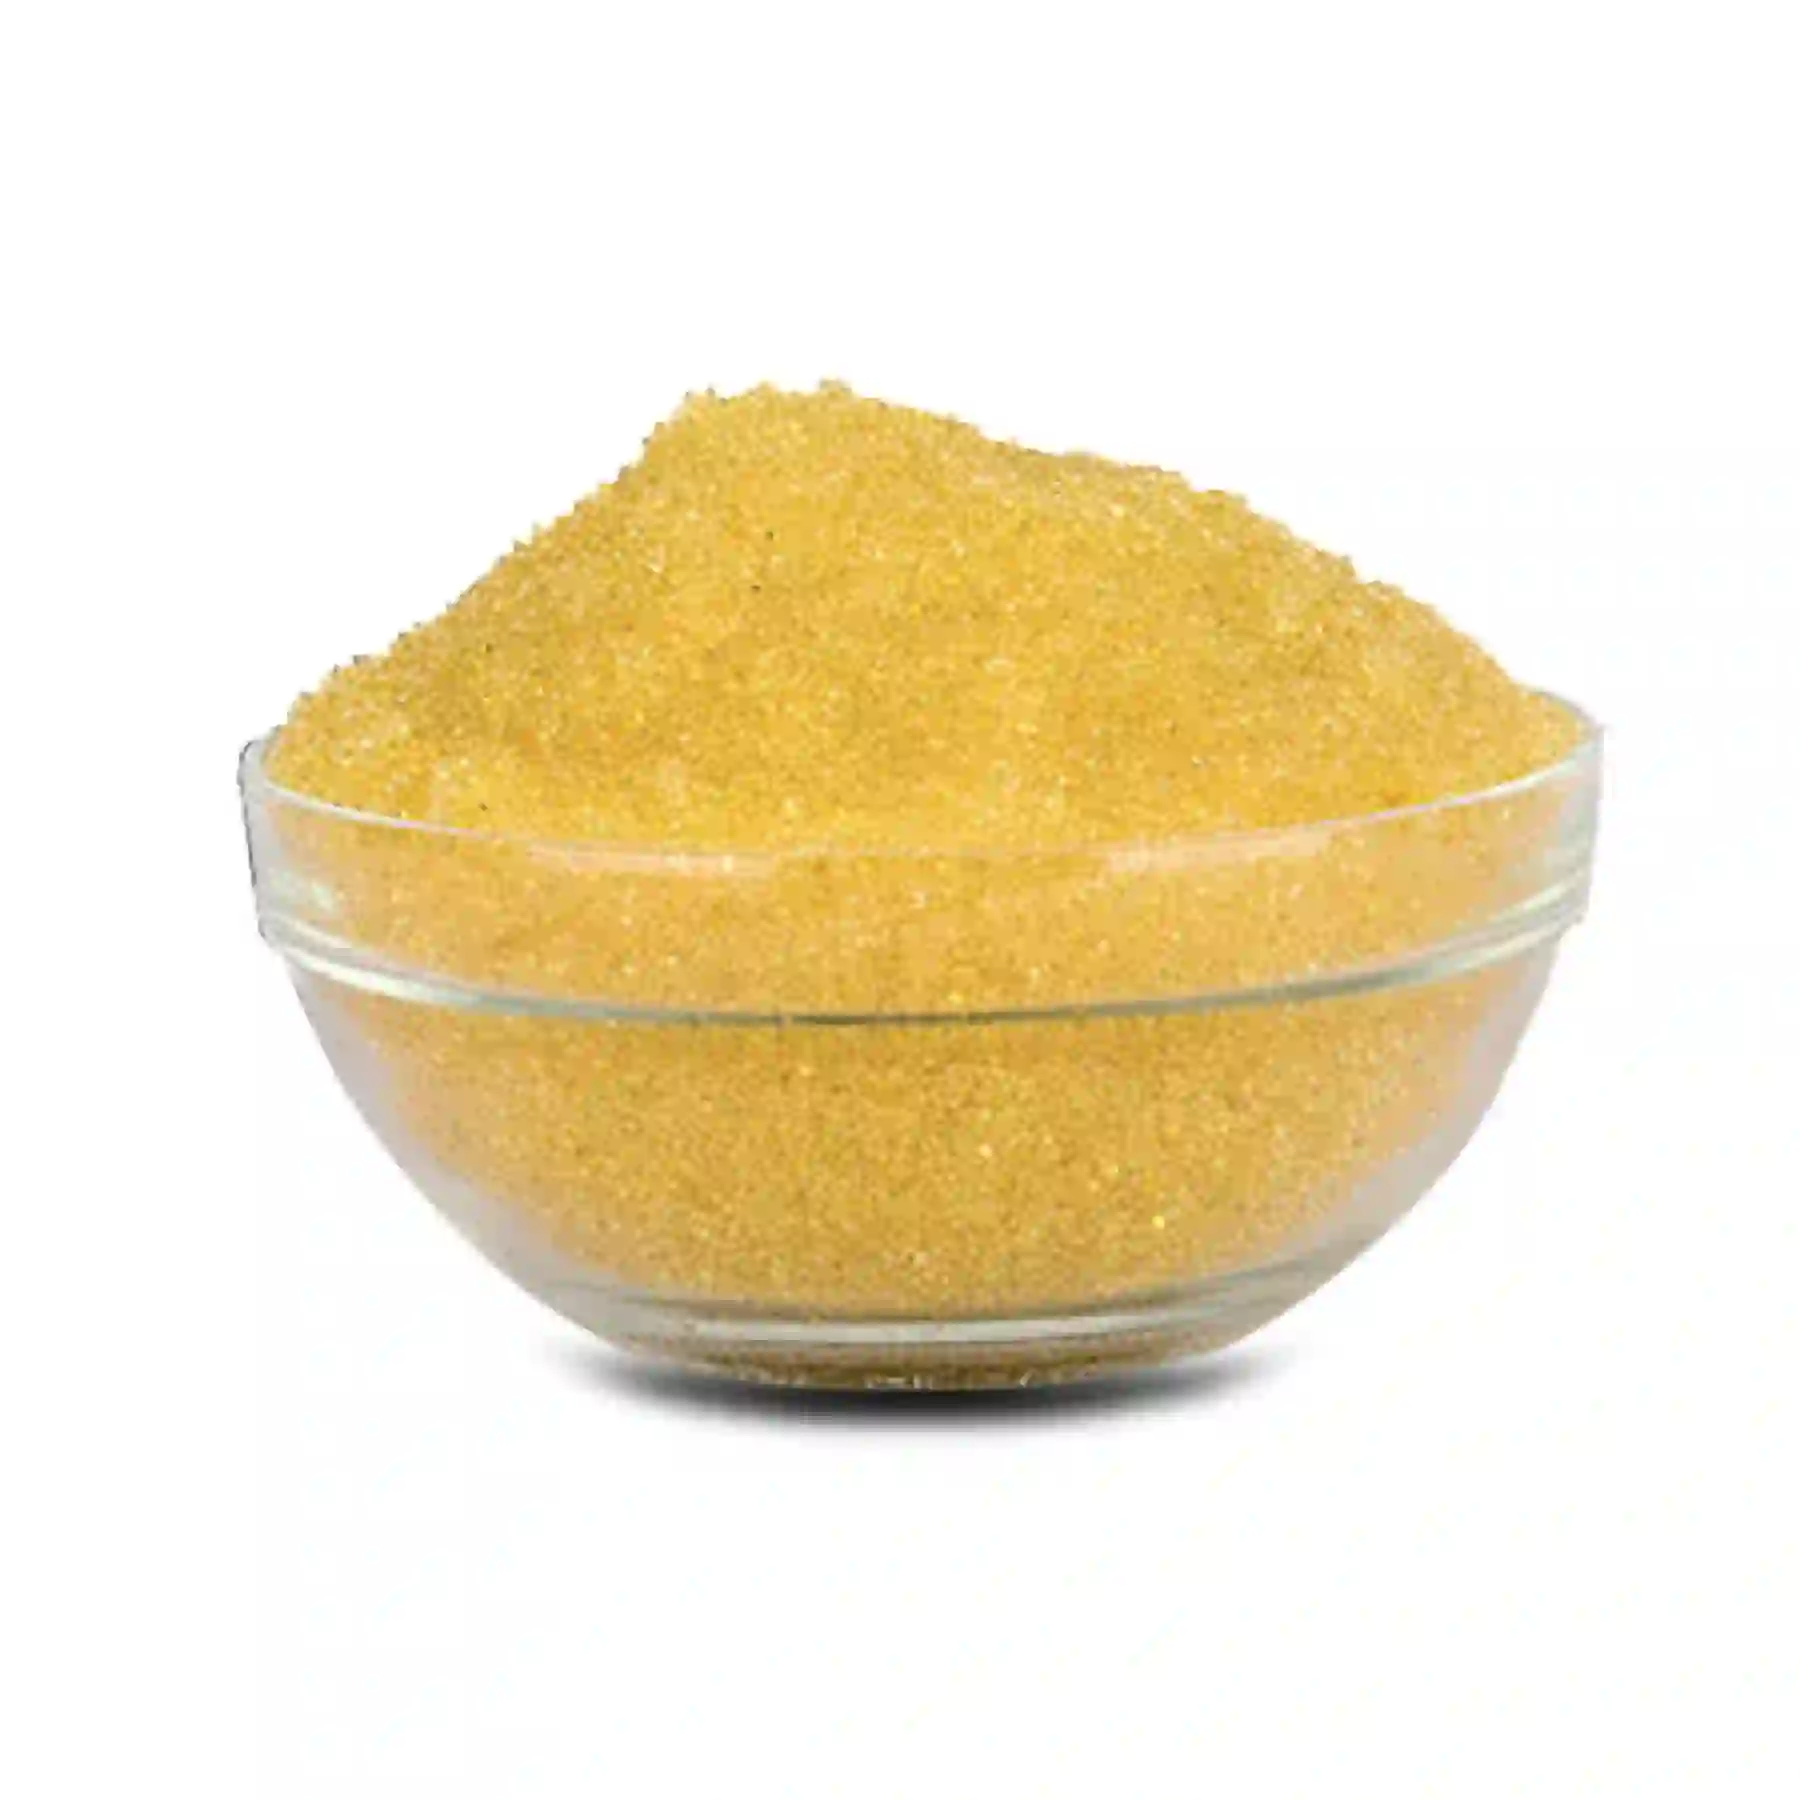 Ion Exchange Resin